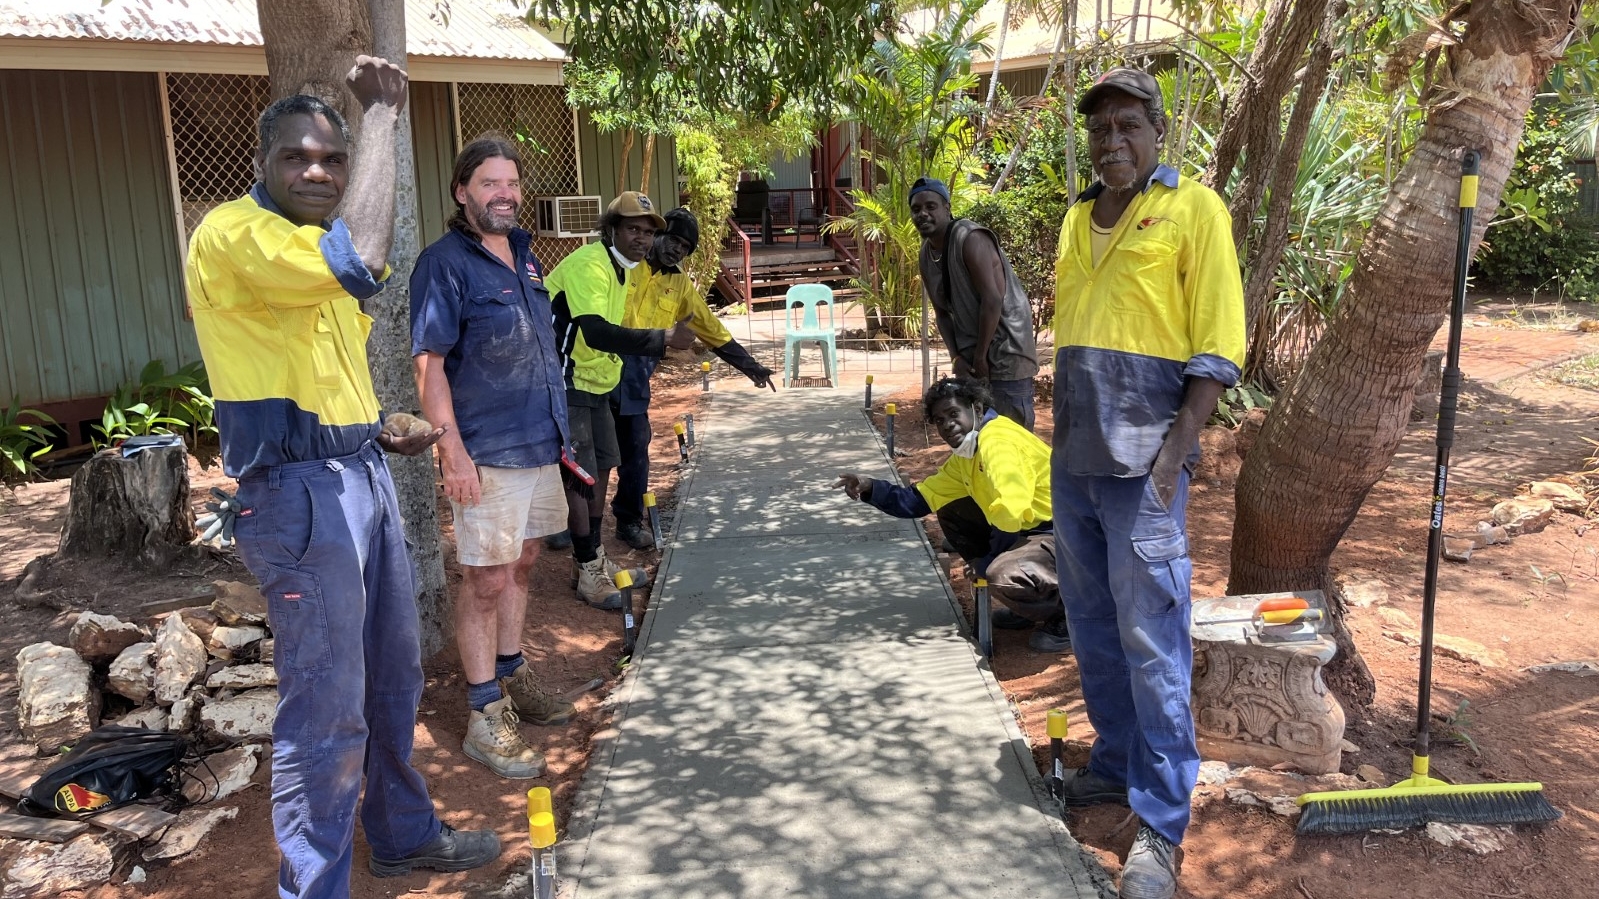 Swinburne’s Head of Croydon Bricklaying Department Matt O’Brieni is picture standing by a footpath with members of one his classes. They are all lined up on either side of the path. They wear work gear and various tools are visible in the background 